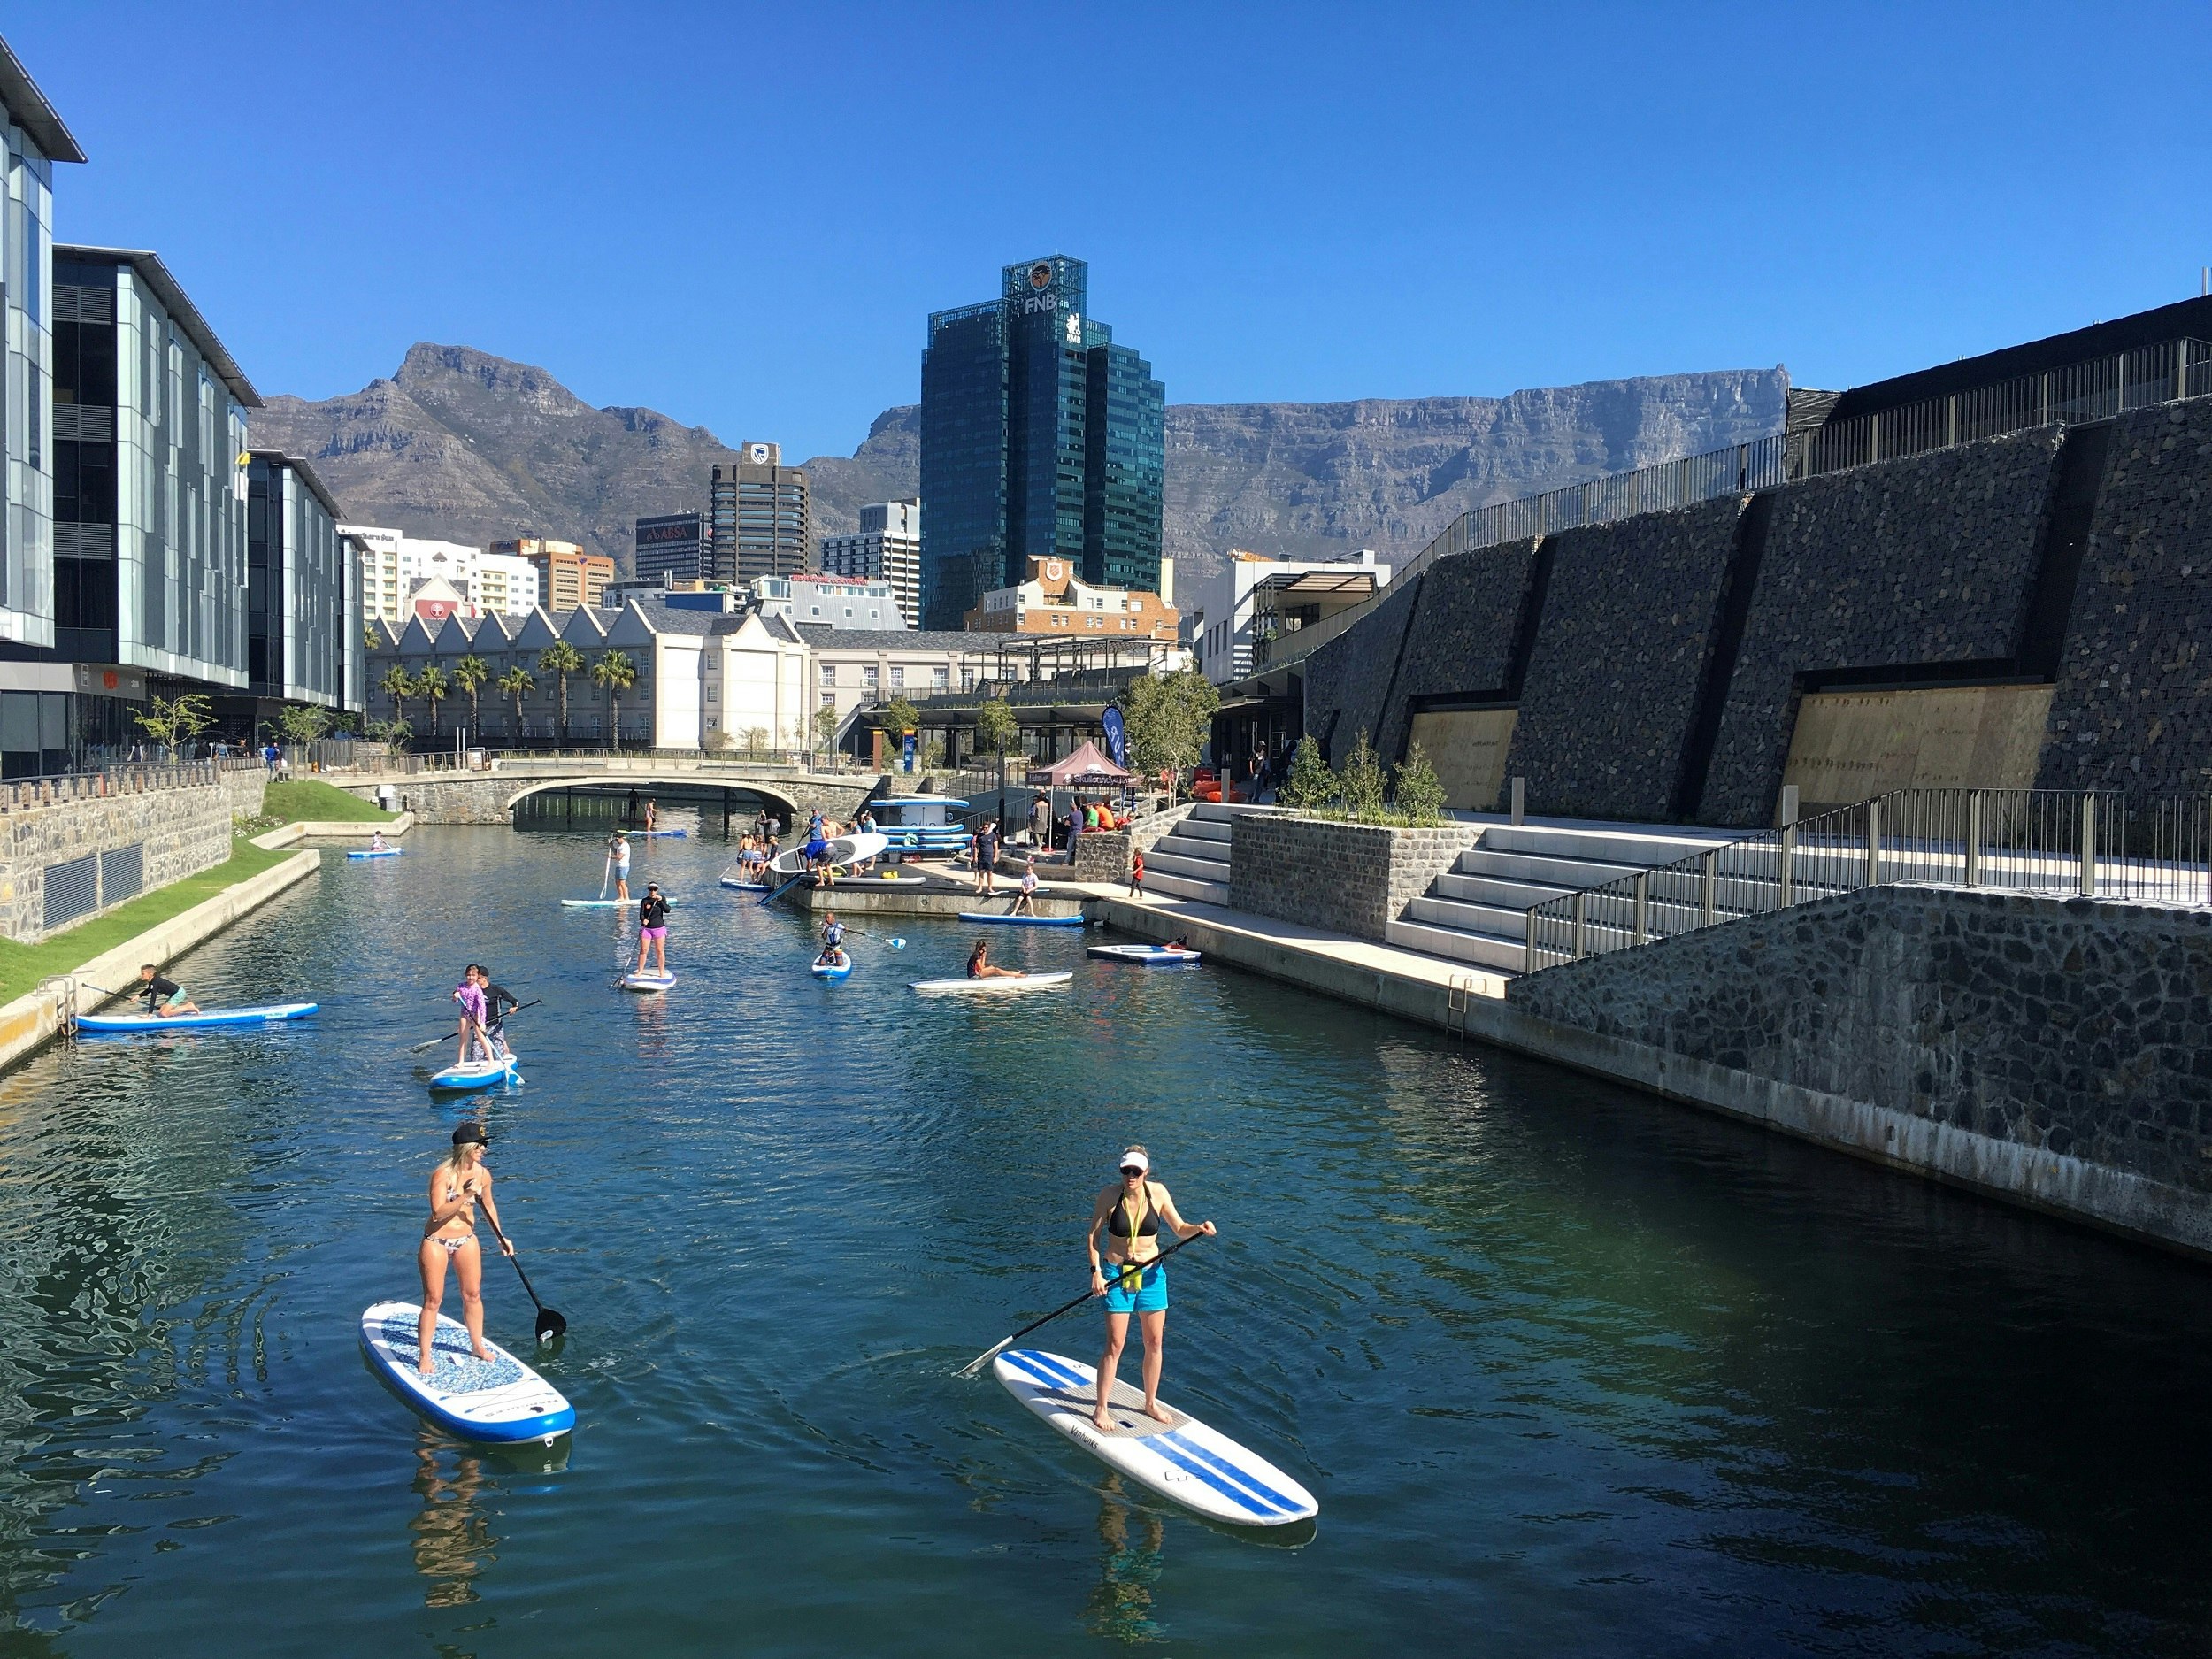 A dozen paddle boarders cruise along a narrow section of the V&A Waterfront; in the background is Table Mountain.